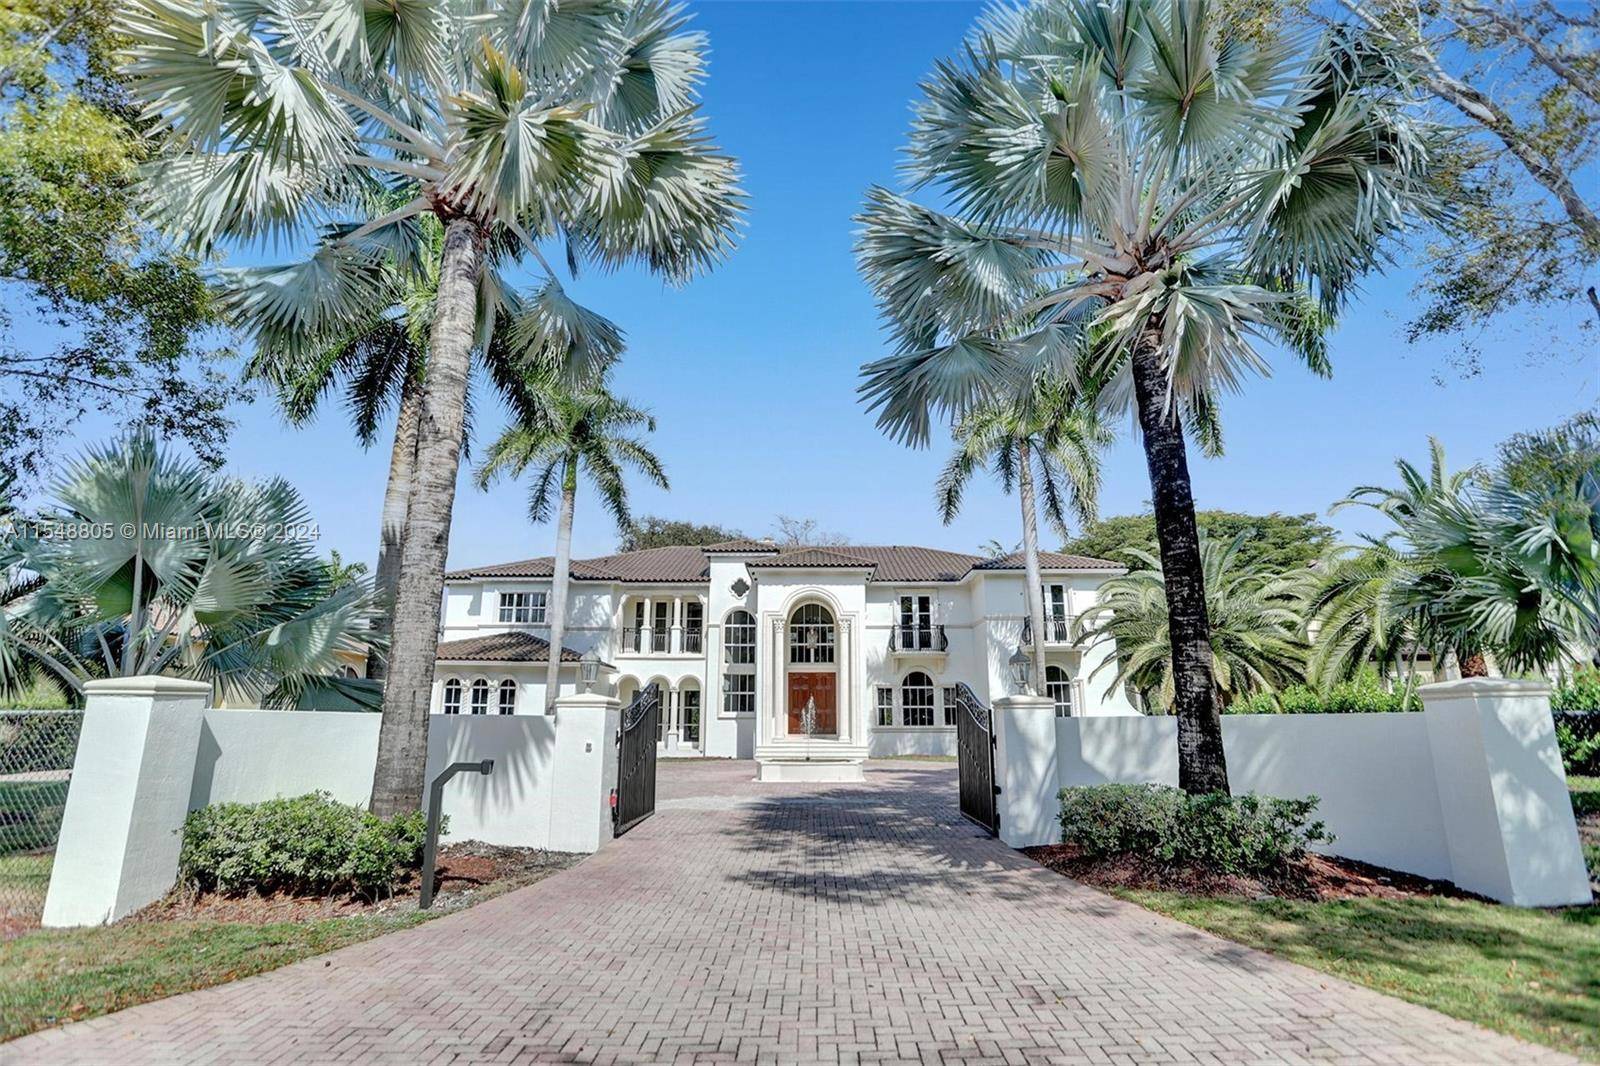 Two story Mediterranean Estate in sought after North Pinecrest located on a quiet street.